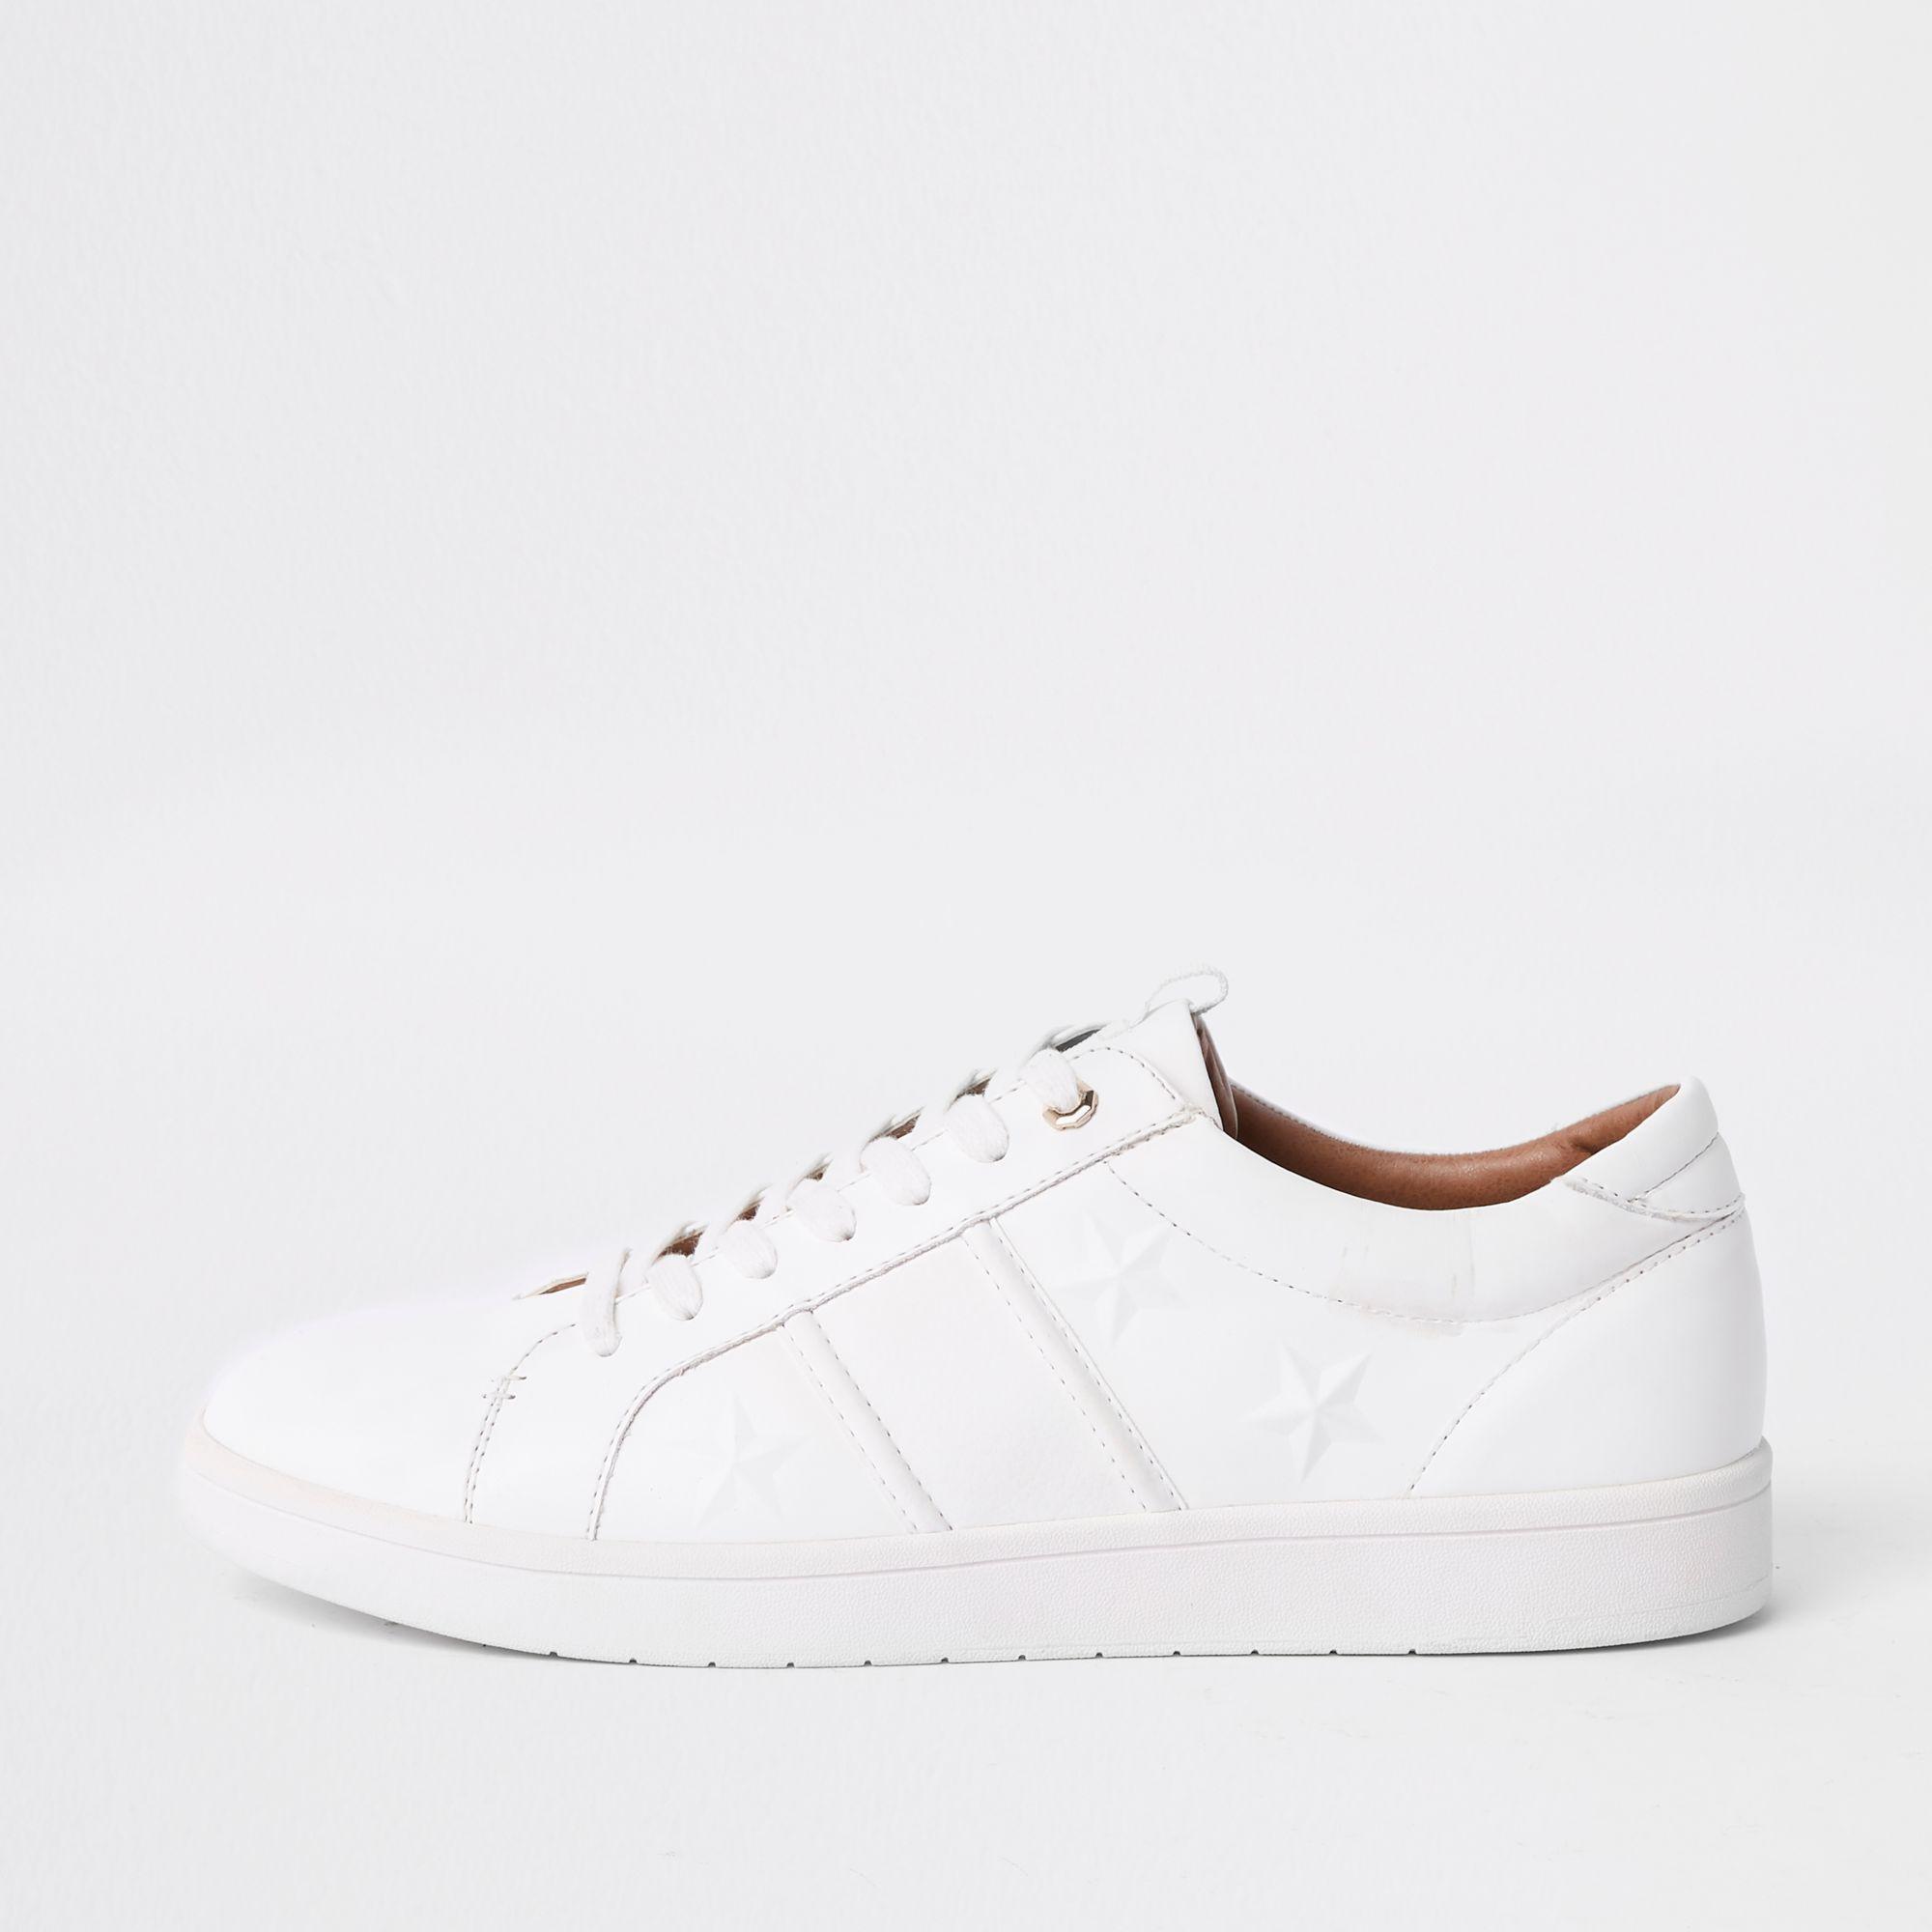 river island white shoes